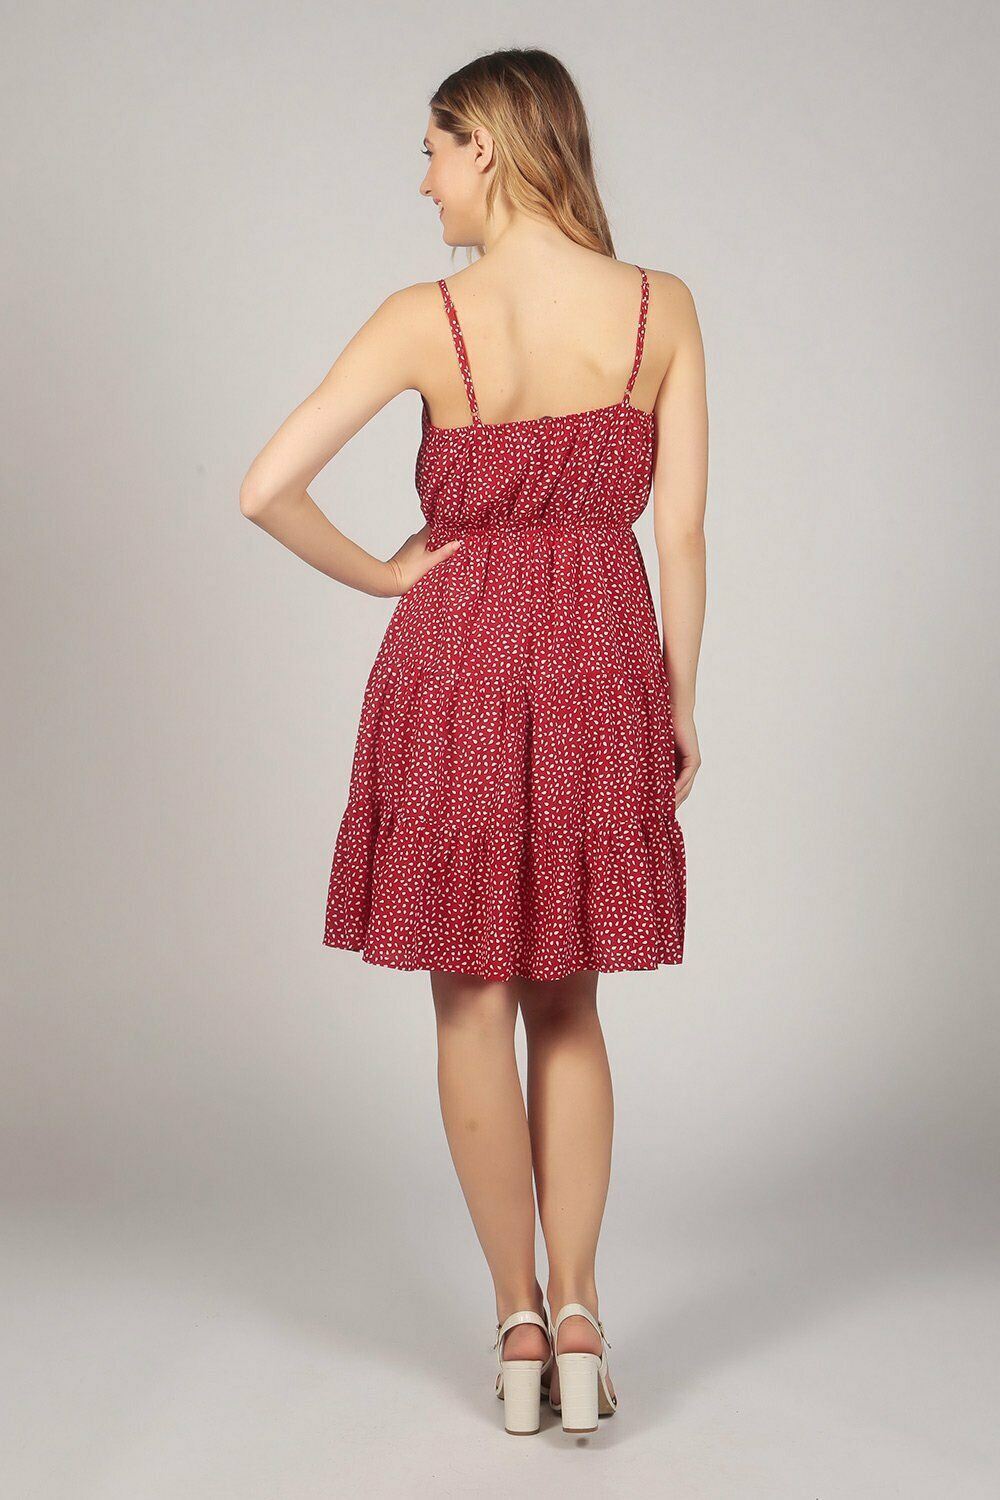 TENKI London Strappy Water Drop Tier Ruffle Dress Red Sizes 14 16 - Beagle Boutique Fashion Outlet